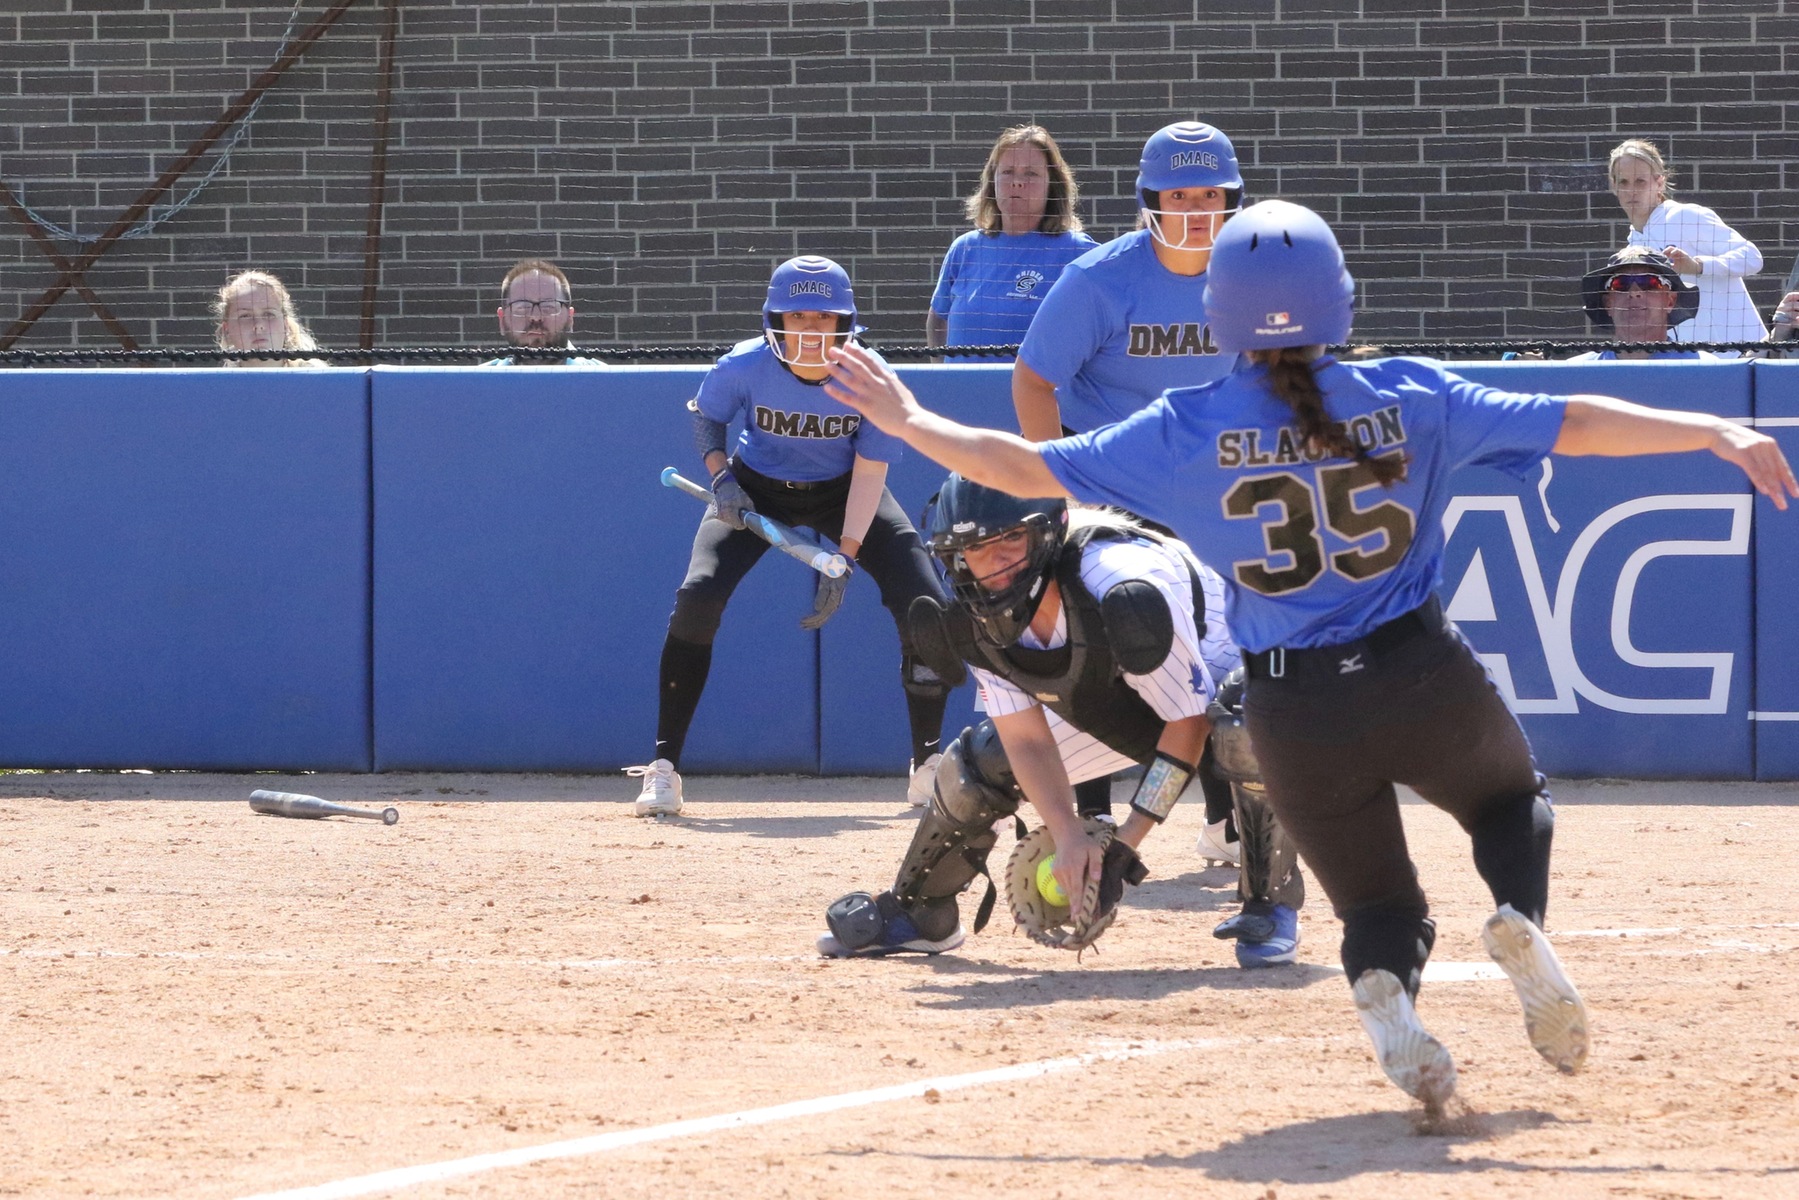 Kirkwood catcher Jessi Butler prepares to tag a DMACC runner at the plate during Wednesday's doubleheader at Kirkwood. (MSR photo by Margaret O'Banion)